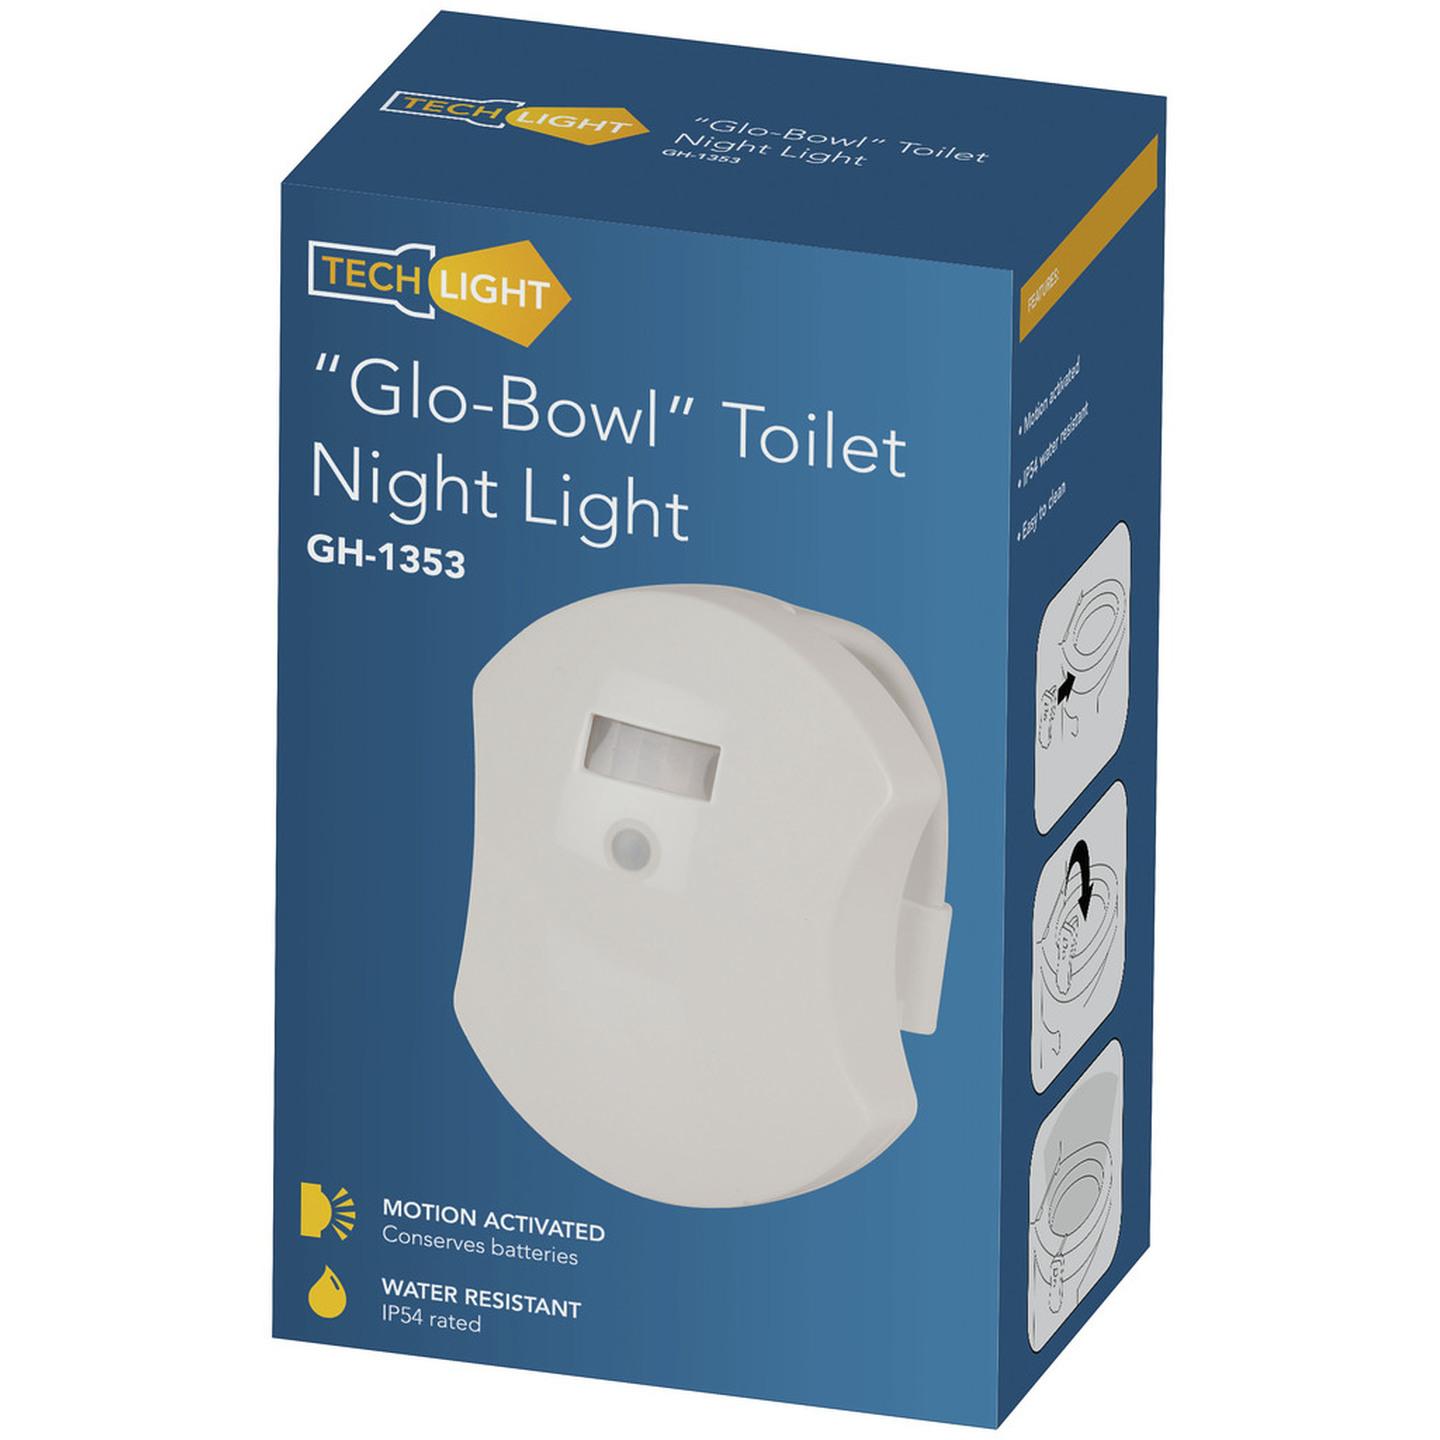 Toilet Night Light with Detector and RGB LED